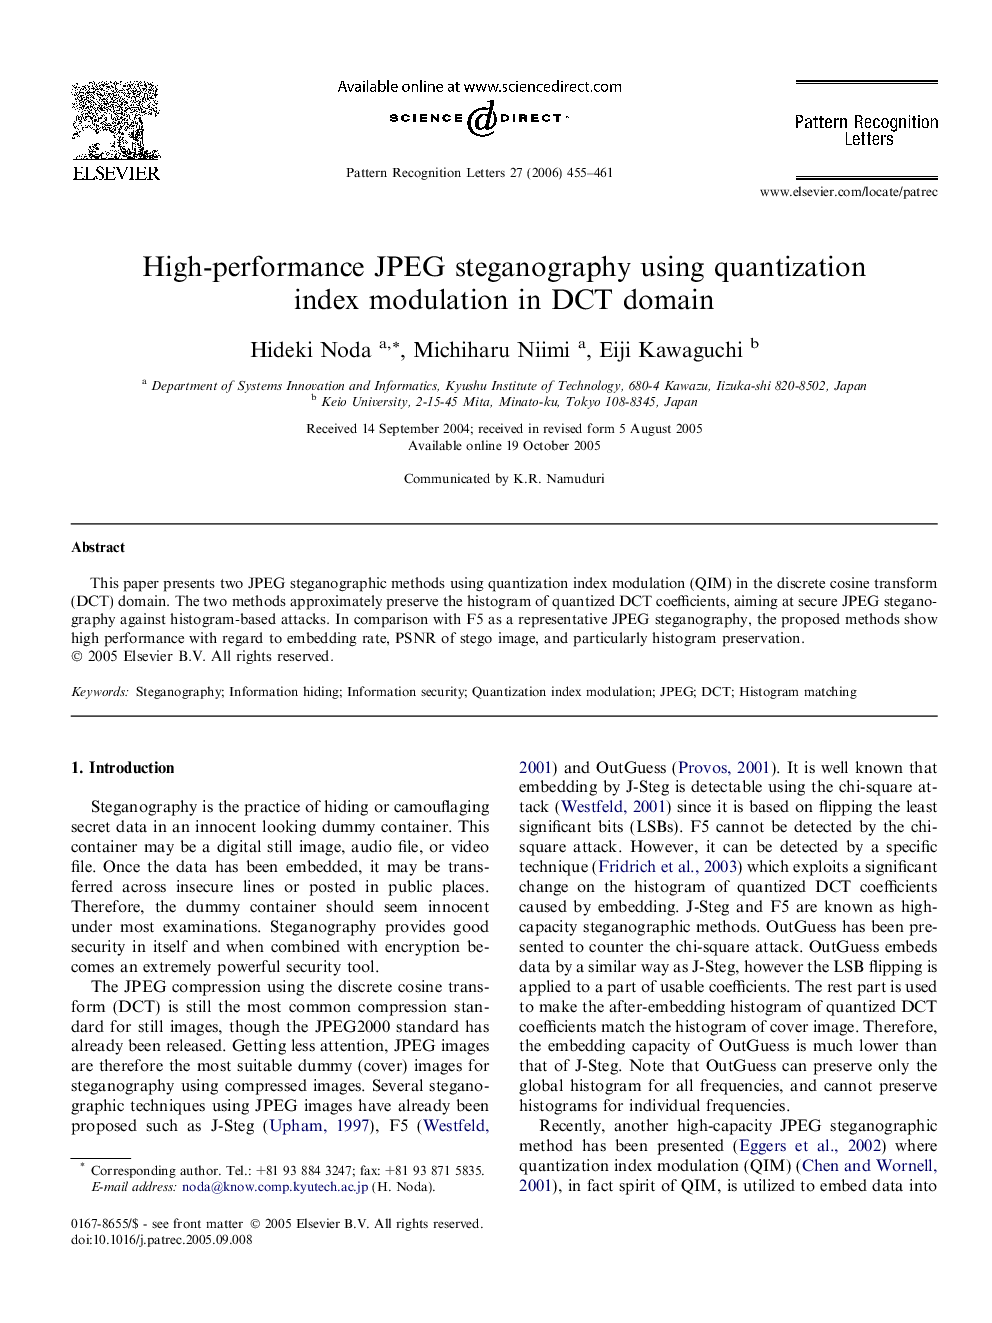 High-performance JPEG steganography using quantization index modulation in DCT domain